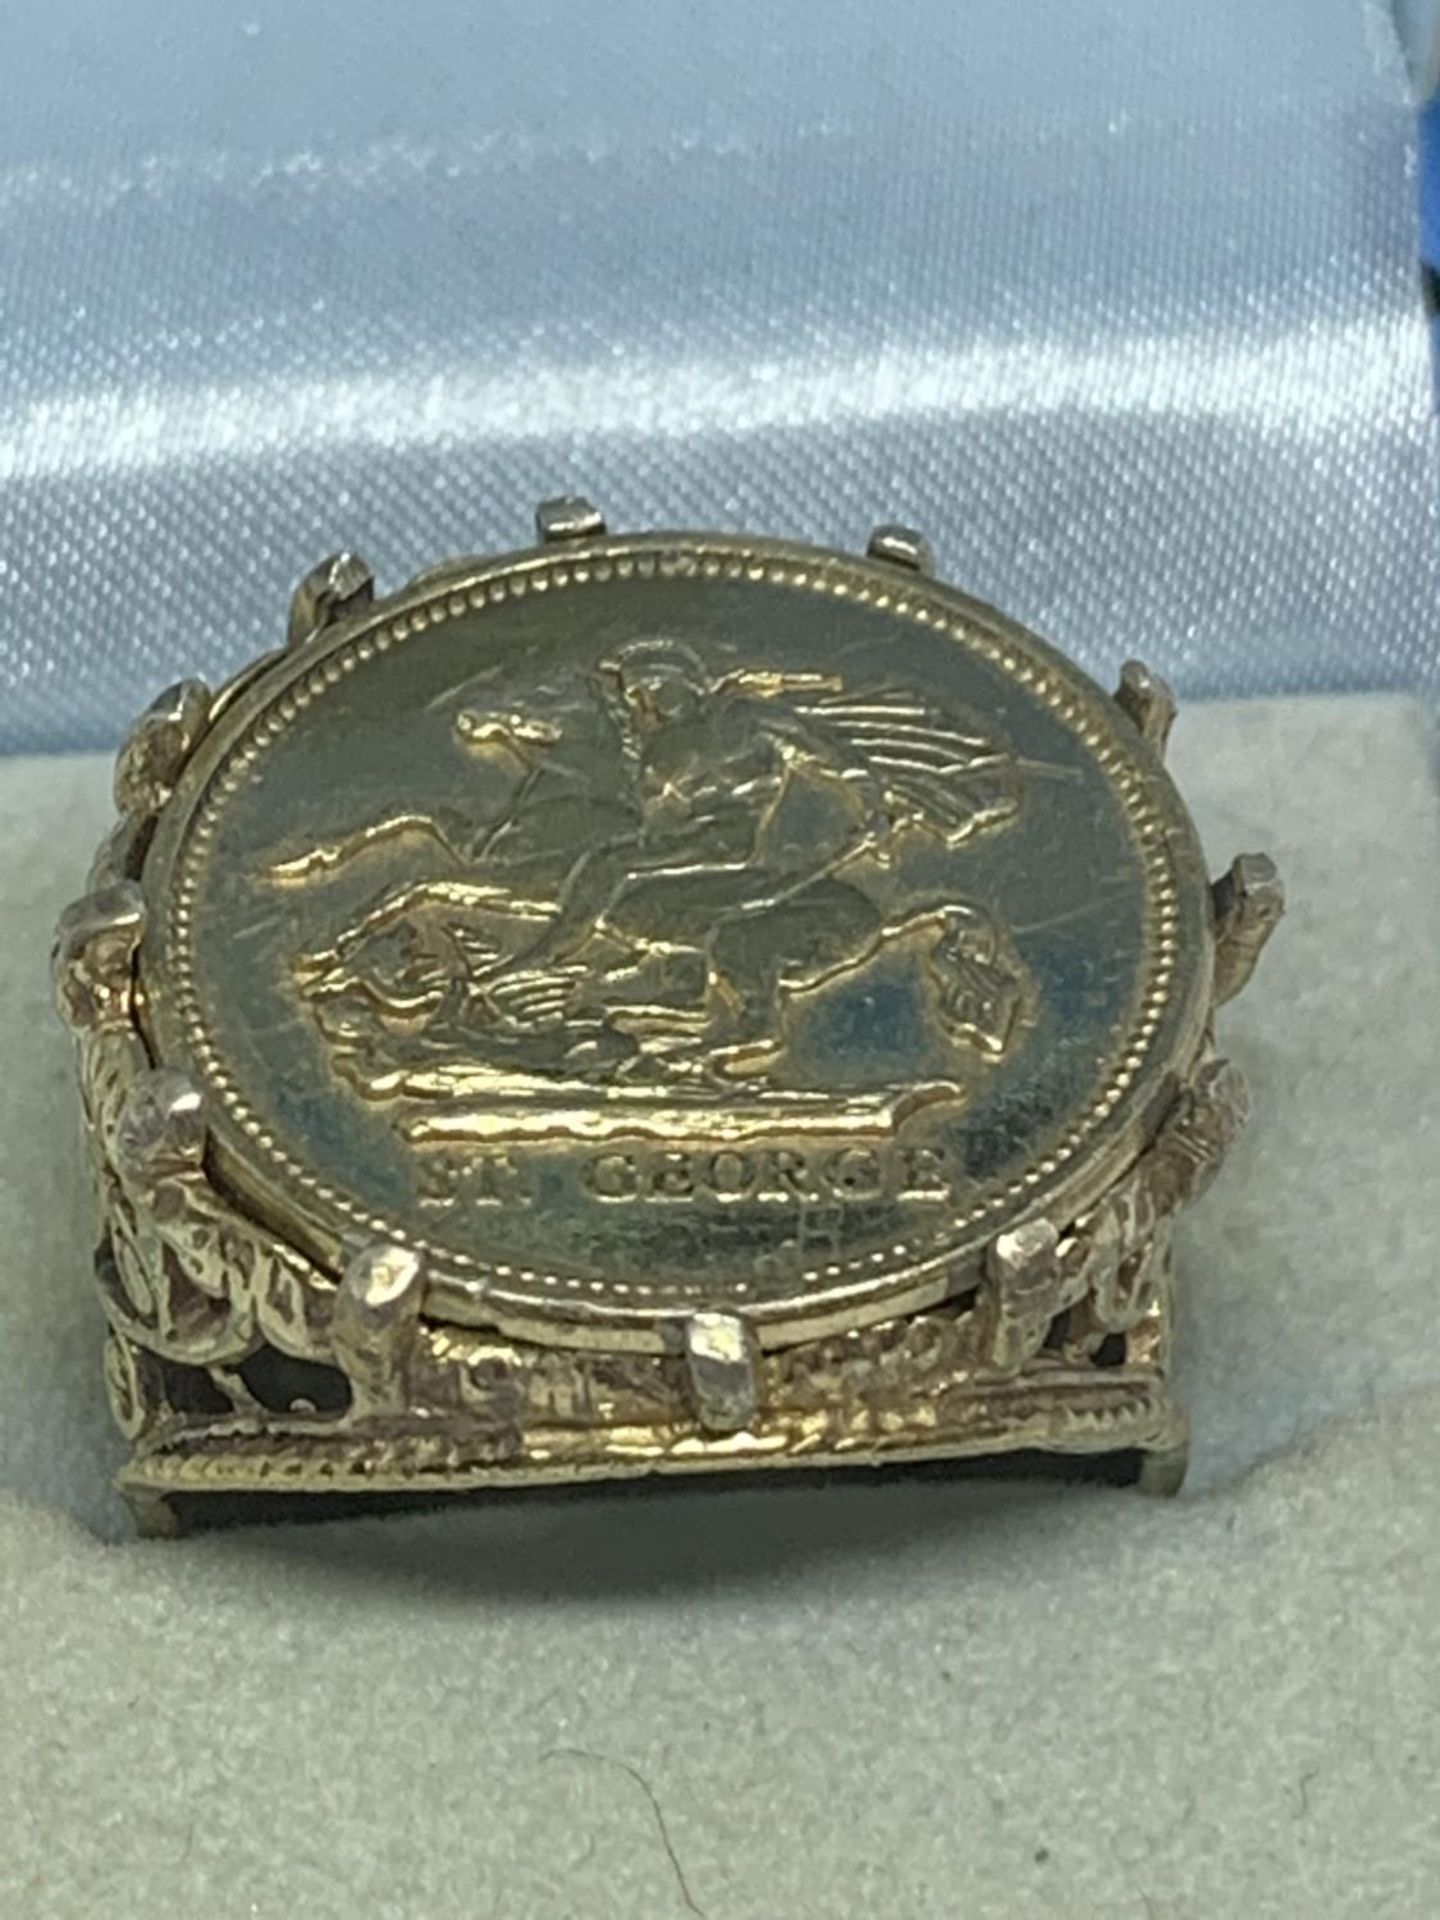 A SOVEREIGN STYLE RING IN A PRESENTATION BOX